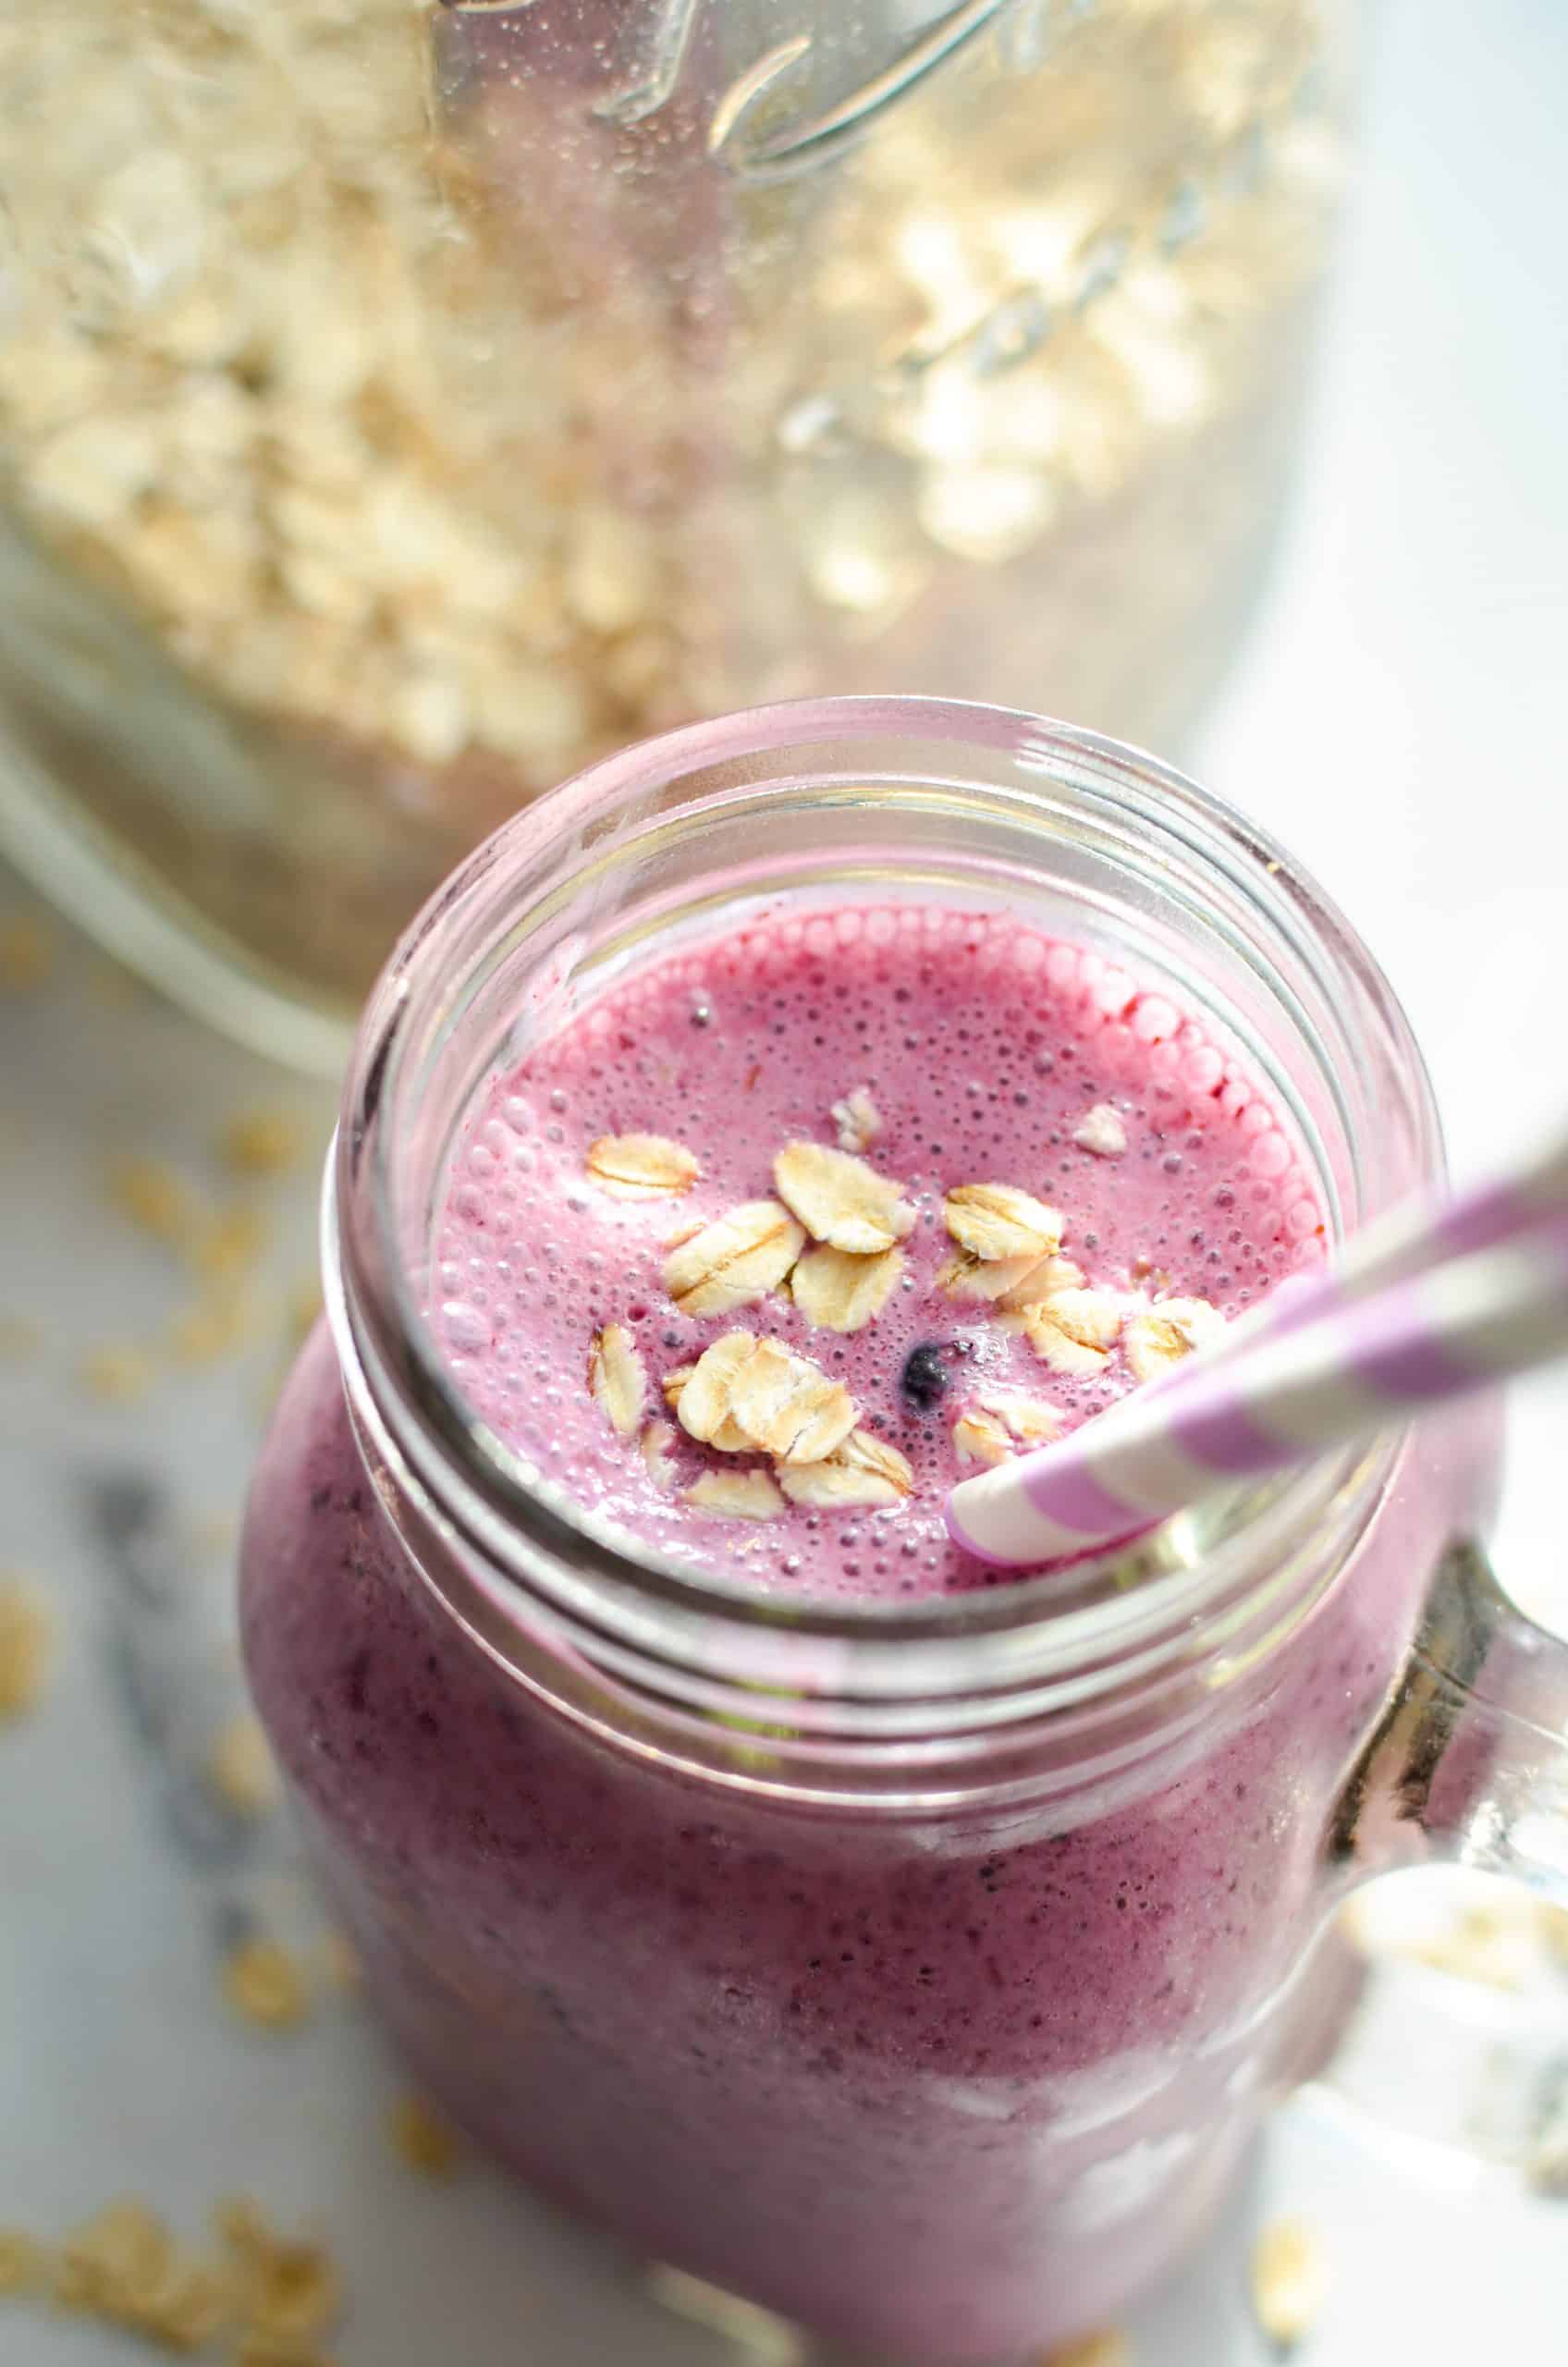 A blueberry smoothie garnished with oatmeal